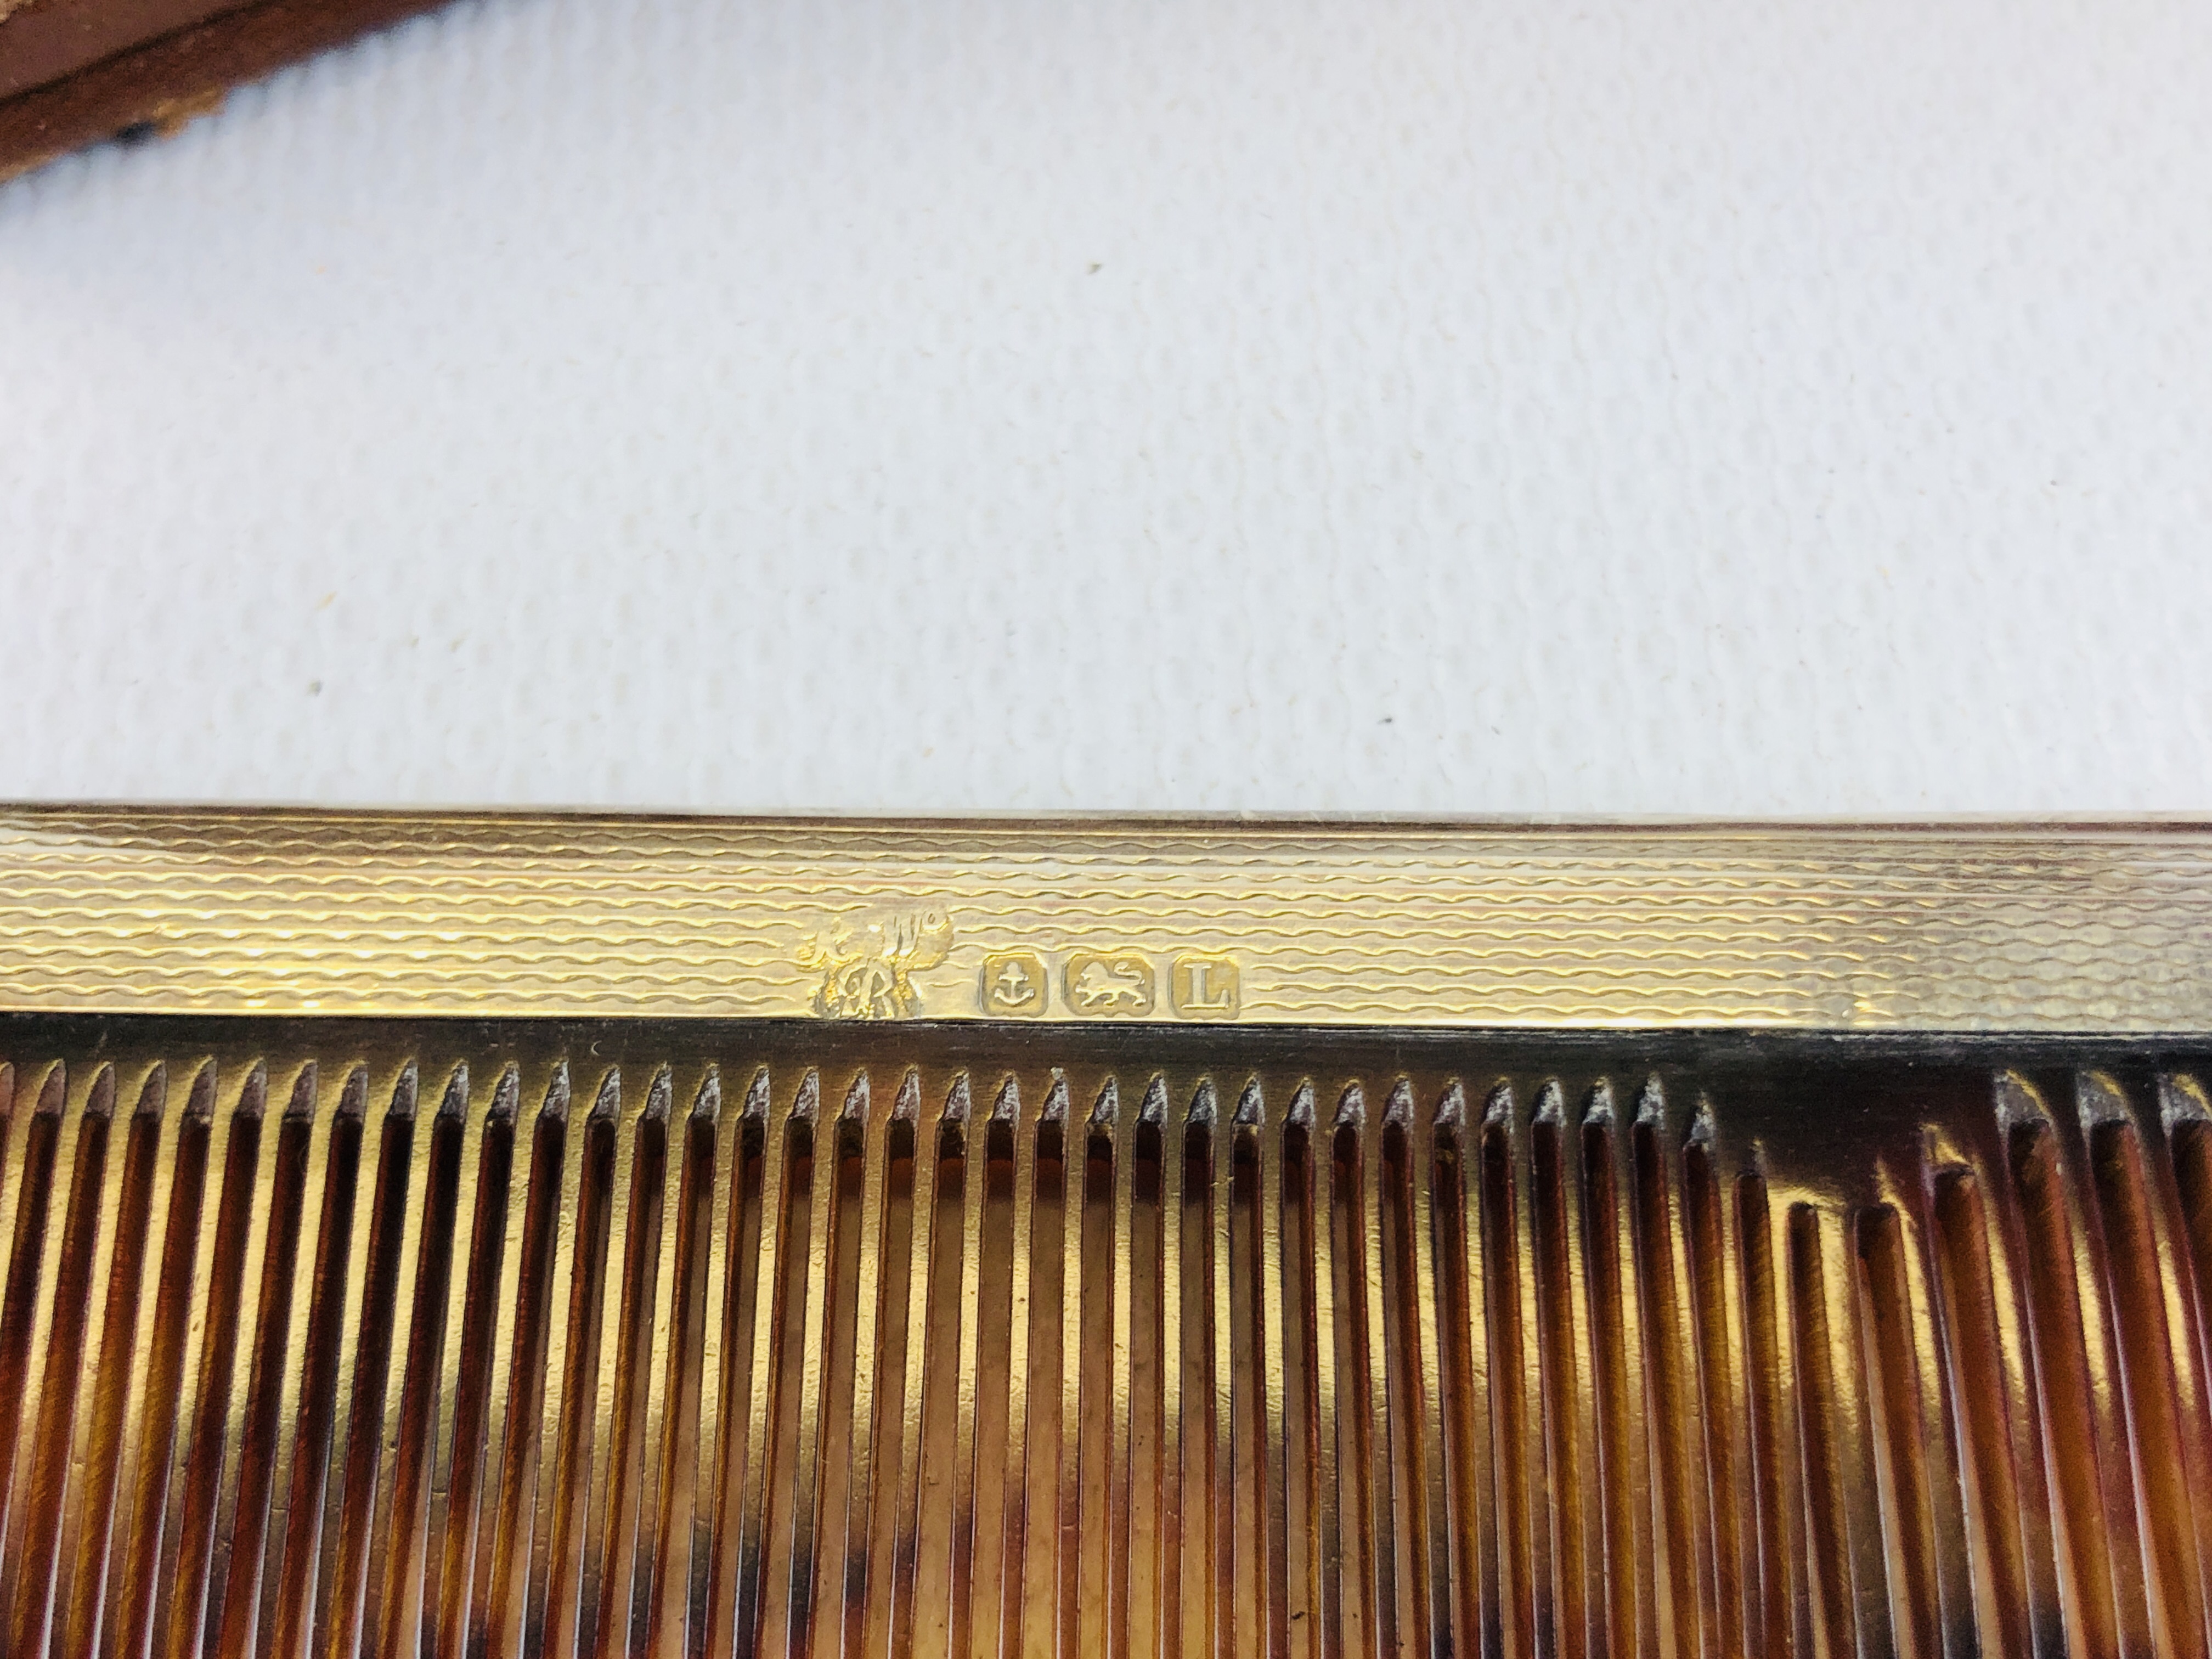 SILVER BACKED BRUSH AND COMB SET IN TAN LEATHER TRAVELLING CASE. - Image 4 of 5